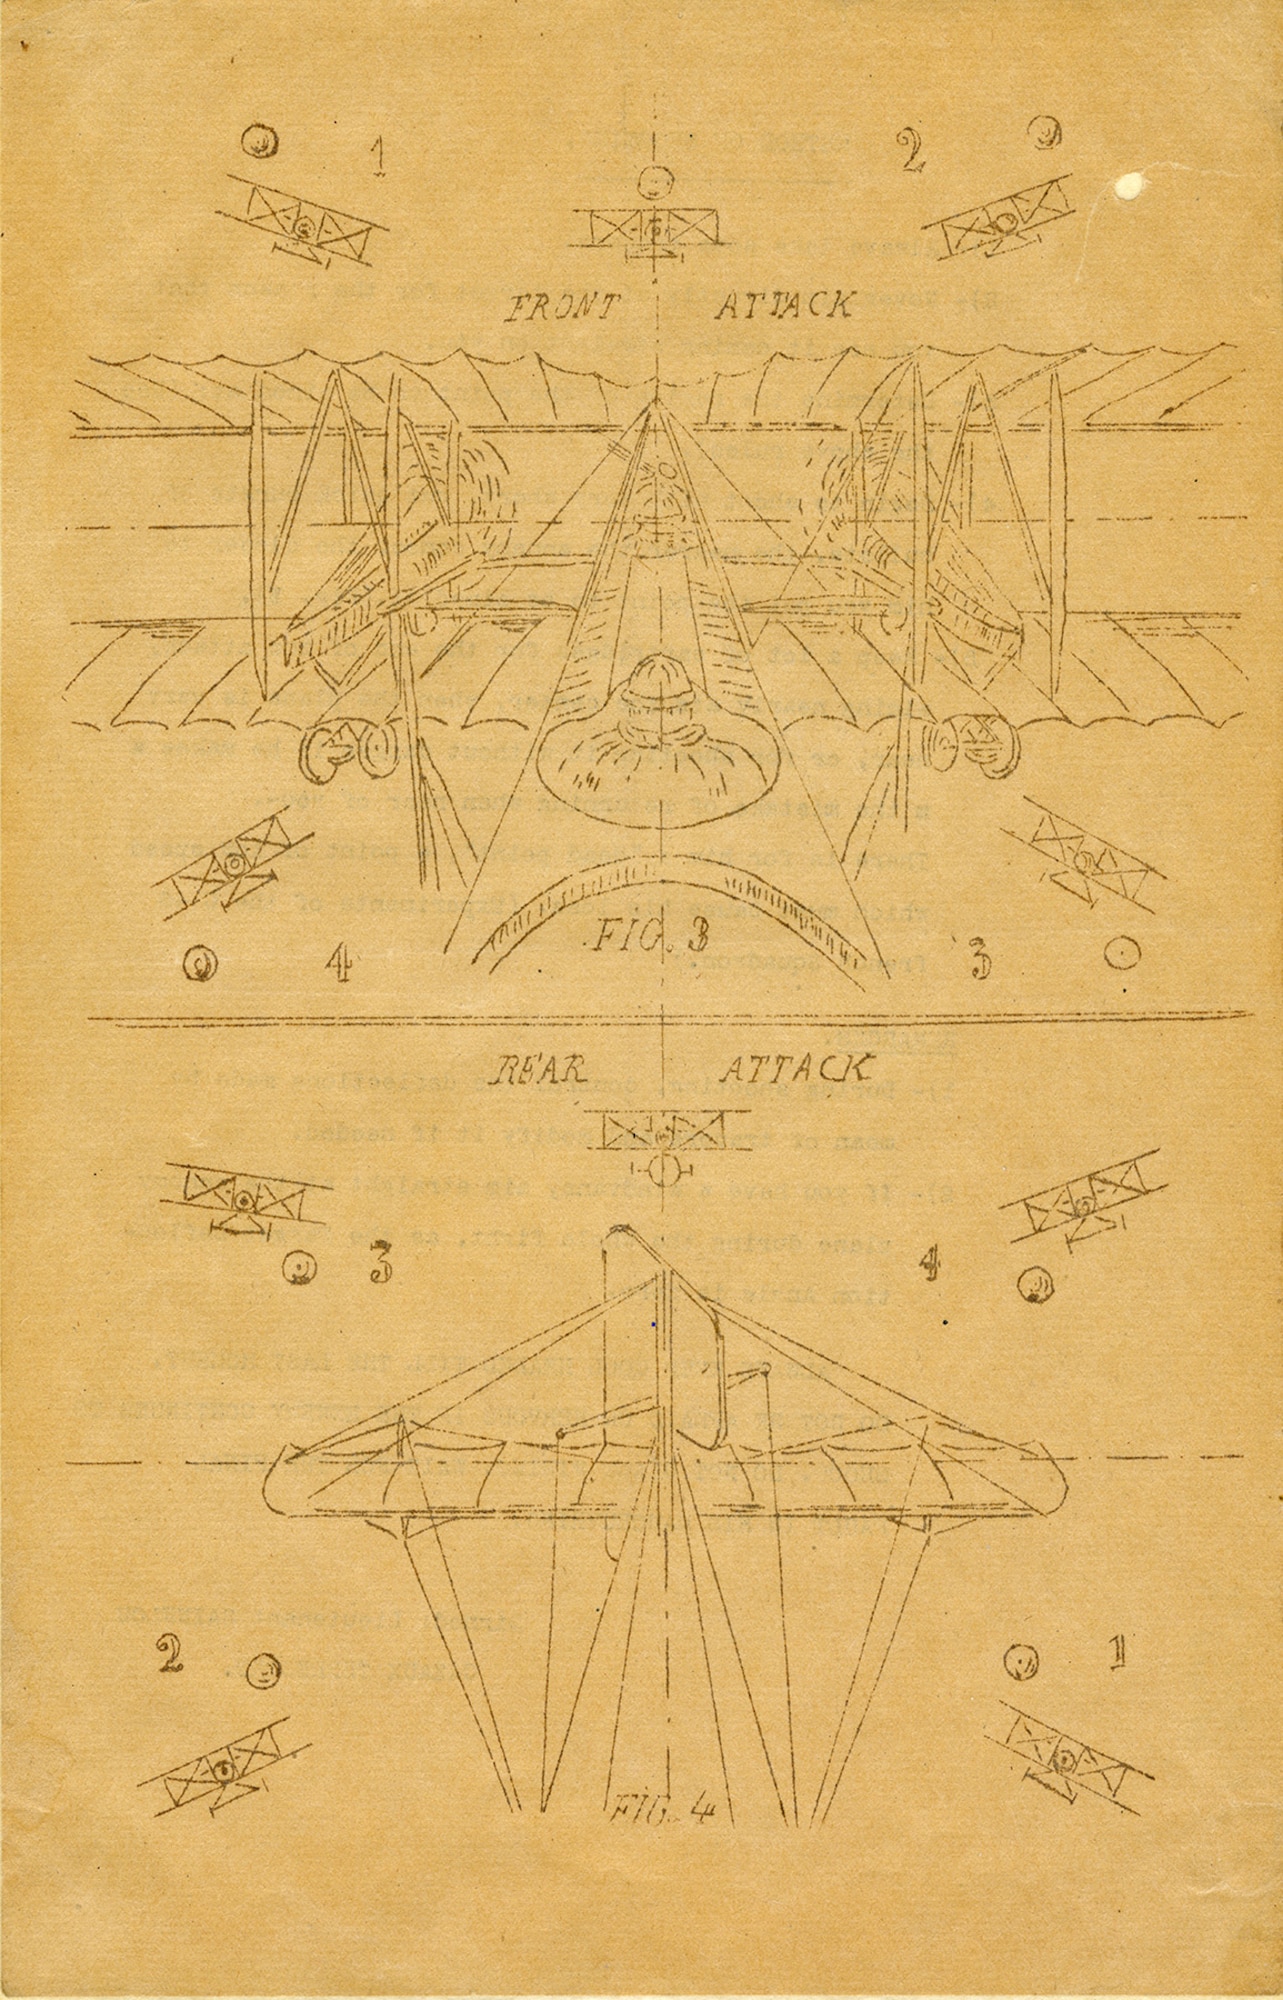 This newsletter, written for aircraft gunners and observers, describes the proper tactics of defensive shooting against enemy pursuit aircraft. These lessons were part of the core training received by American observers in France during World War I. This newsletter returned home with Lt. Harry F. Slarb, an observer with 9th Aero Squadron. (U.S. Air Force photo)